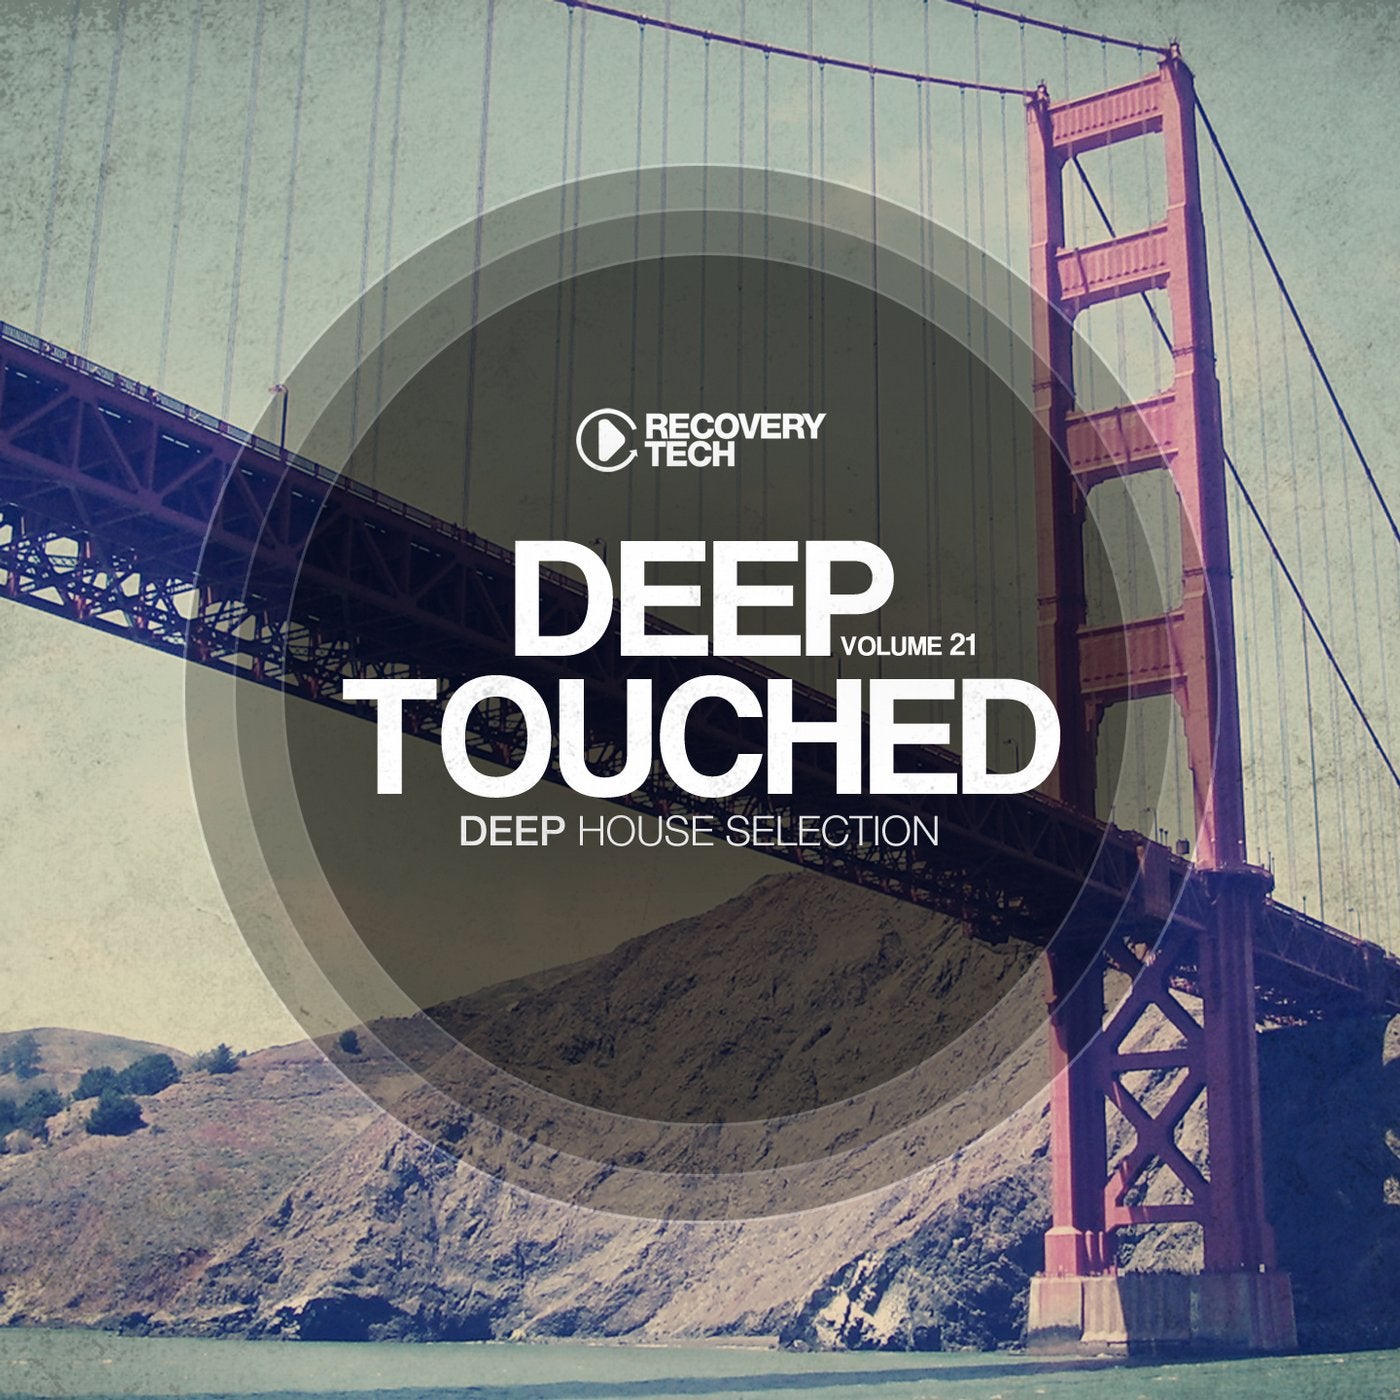 Deep touch. Touch me Deep.